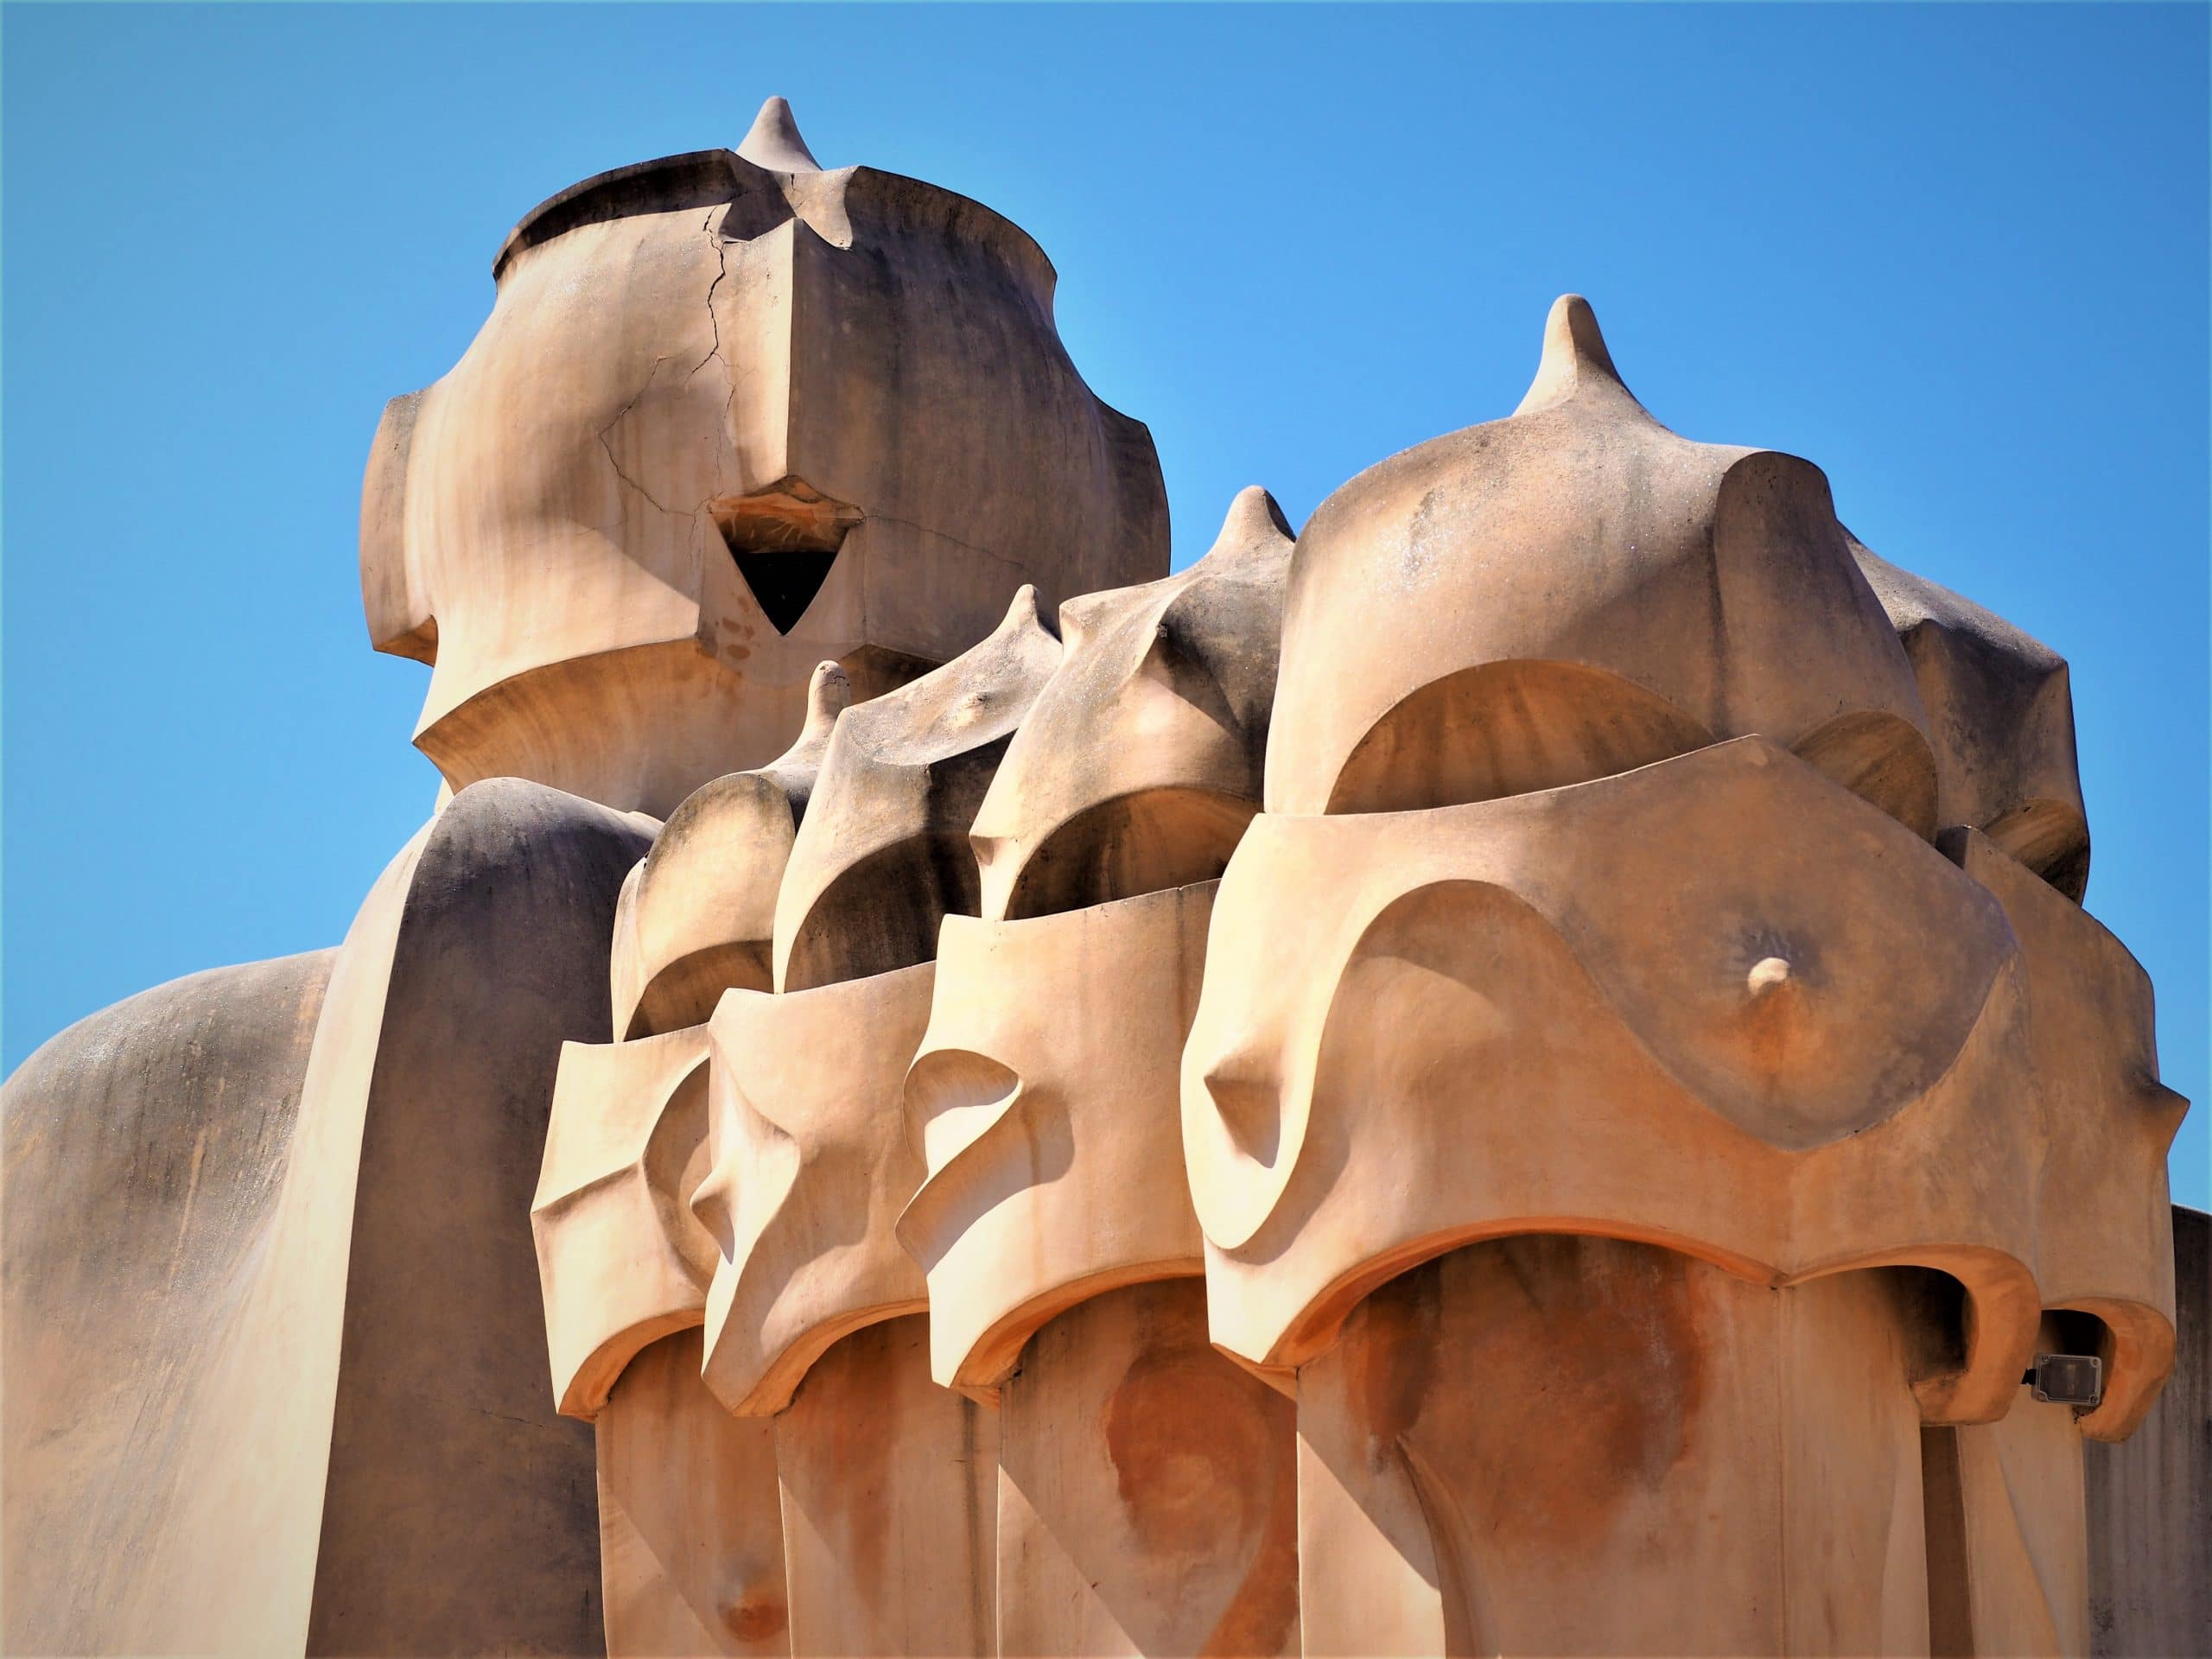 La Pedrera by Gaudí, the chimneys on the rooftop. Barcelona Highlights tour.